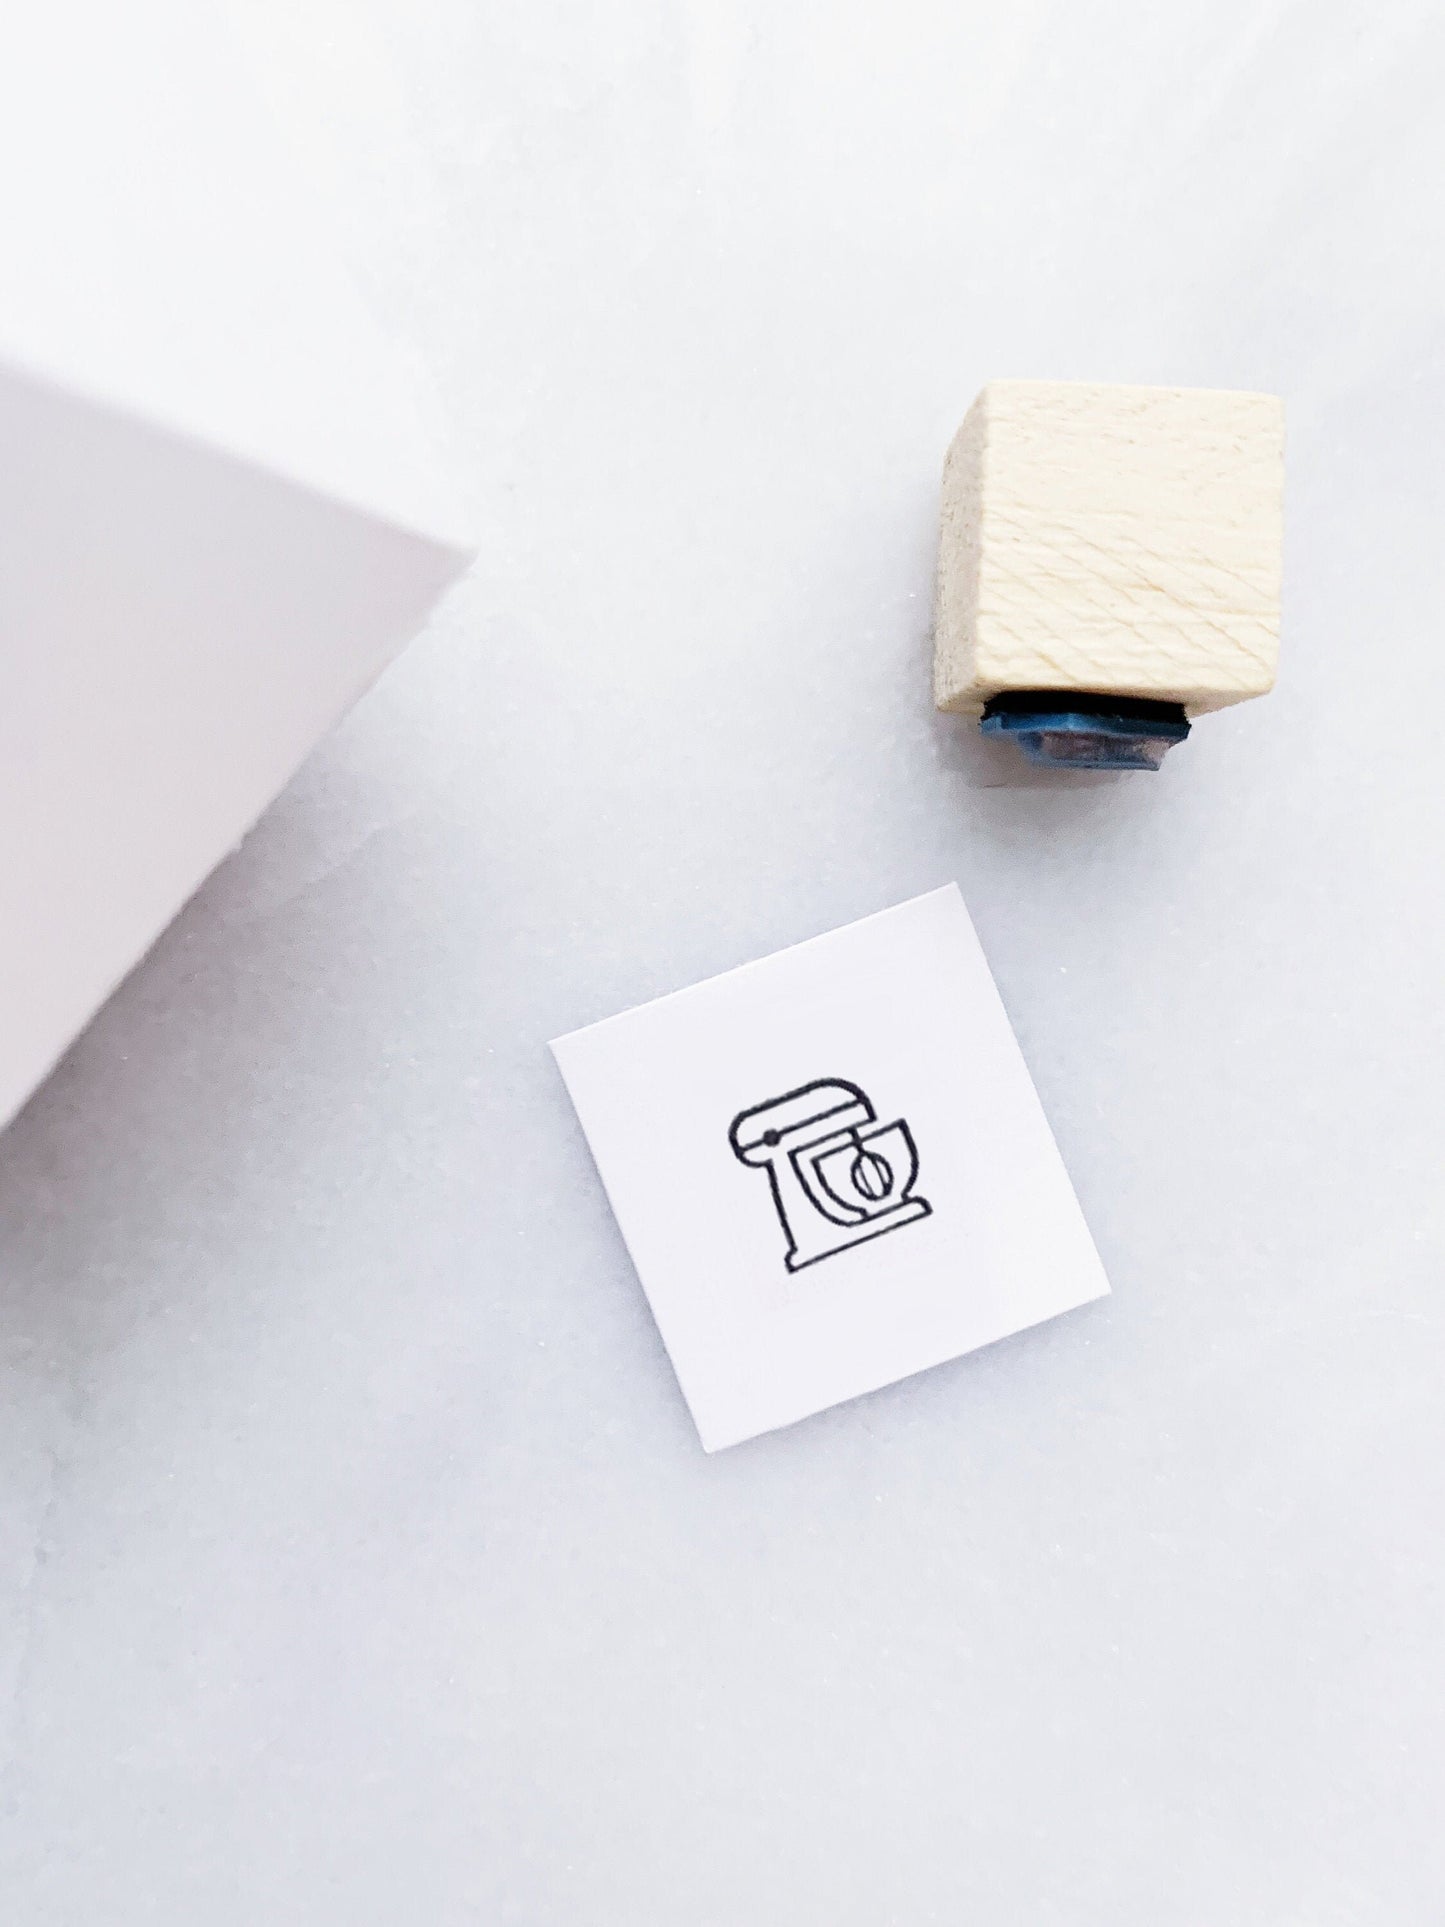 Baking Rubber Stamp